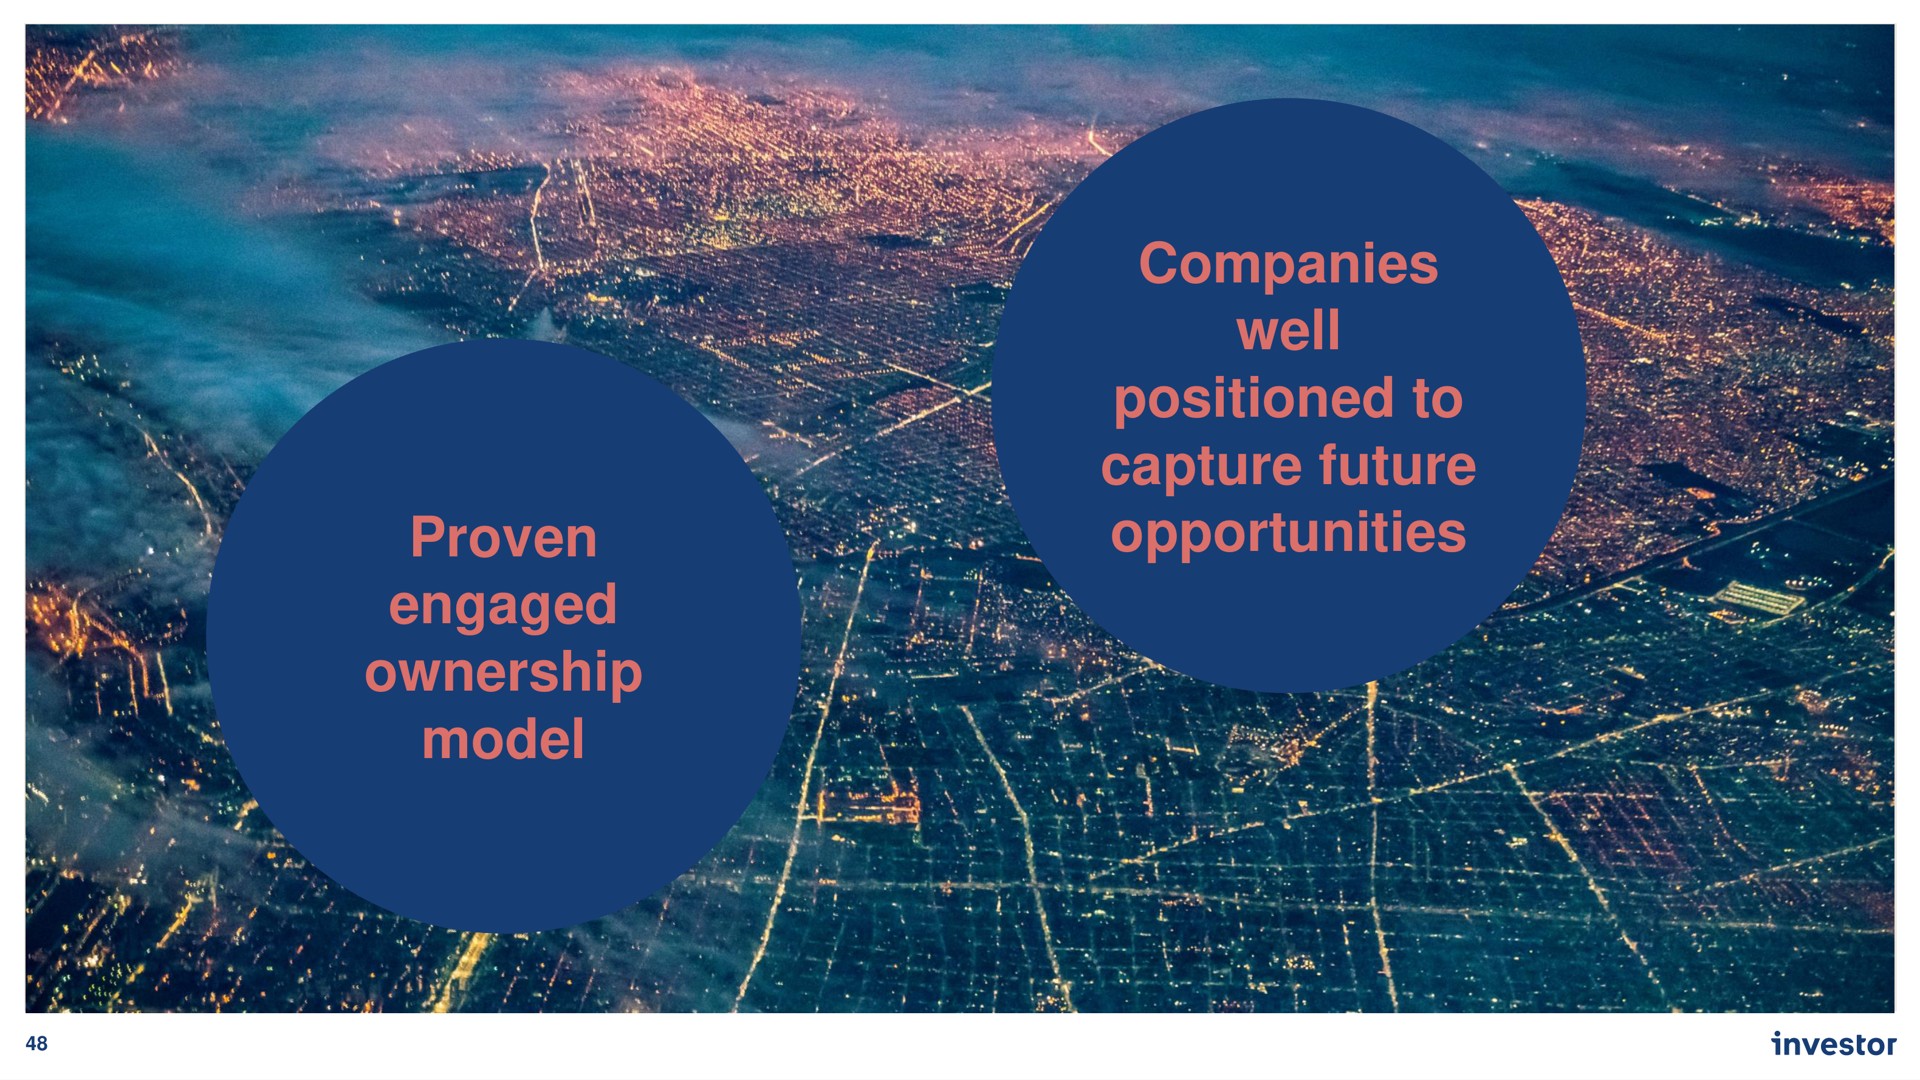 companies well positioned to capture future opportunities proven engaged ownership model | Investor AB